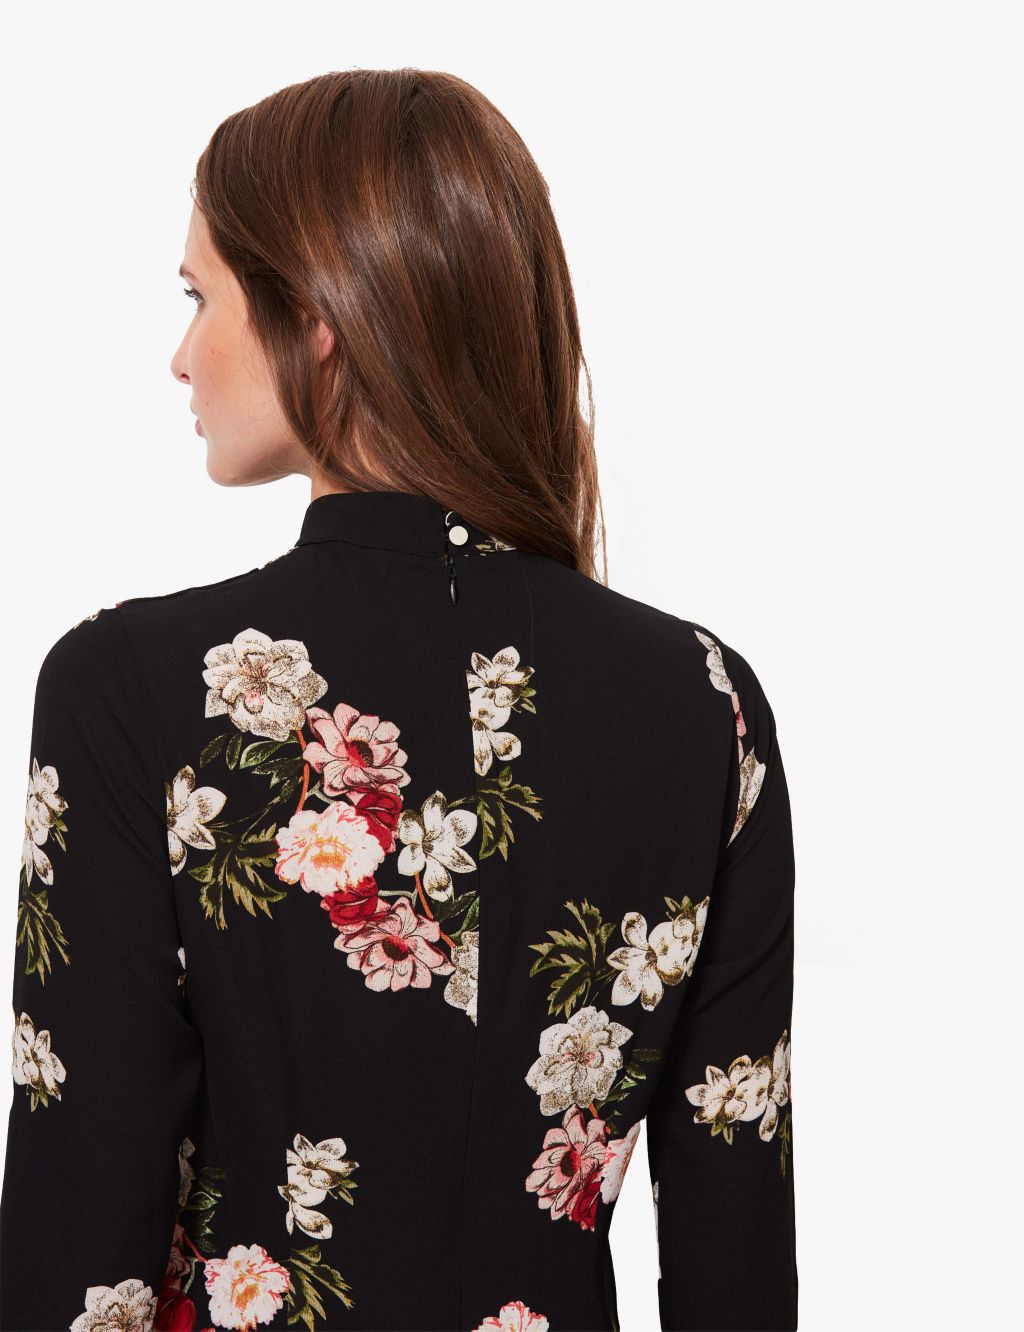 Floral High Neck Long Sleeve Top image 3